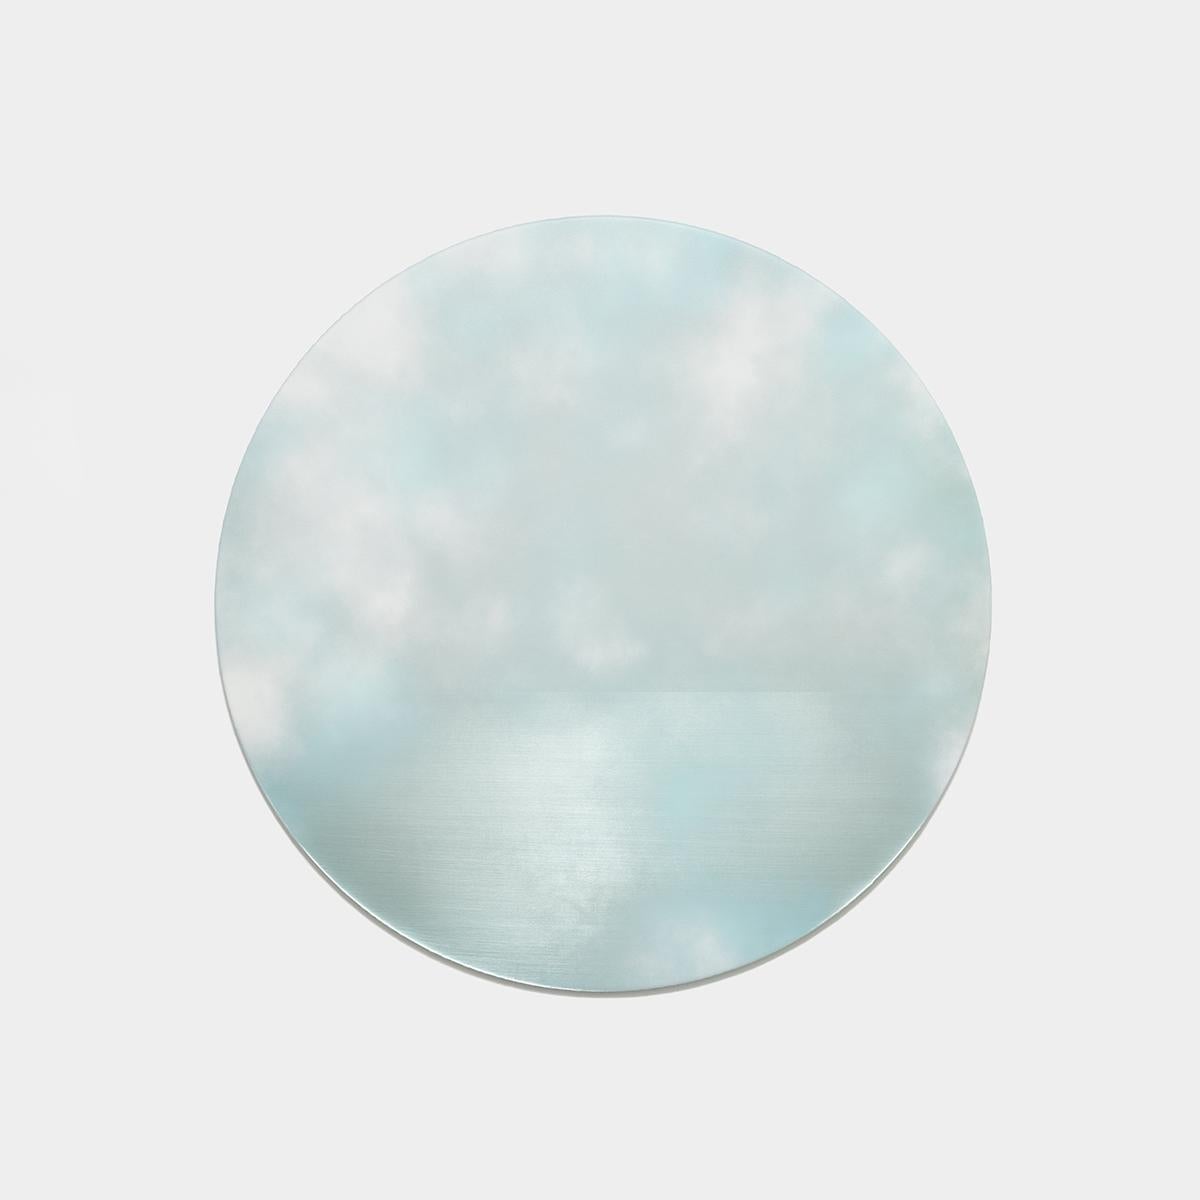 Reflective round painting of clouds in a pale blue sky